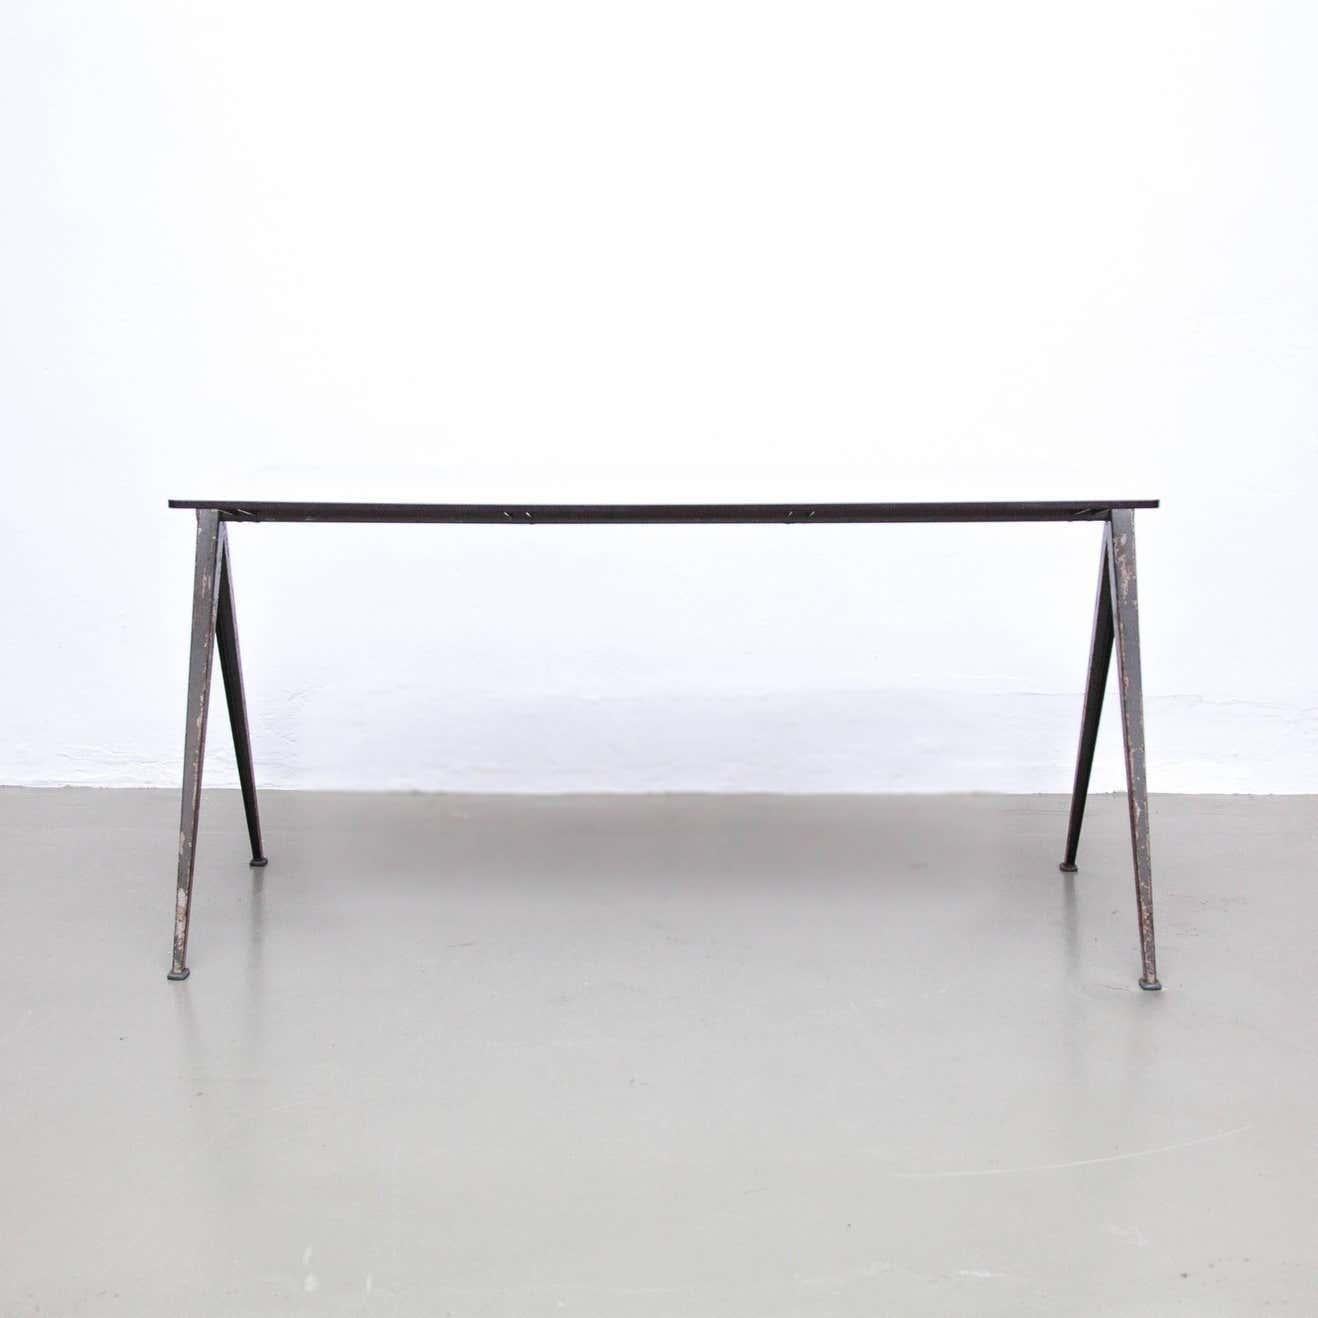 Pyramid table designed by Wim Rietveld.
Manufactured by Ahrend de Cirkel in Netherlands, circa 1960.

The table has the steel frame.

In good original condition, with minor wear consistent with age and use, preserving a beautiful patina.

Wim